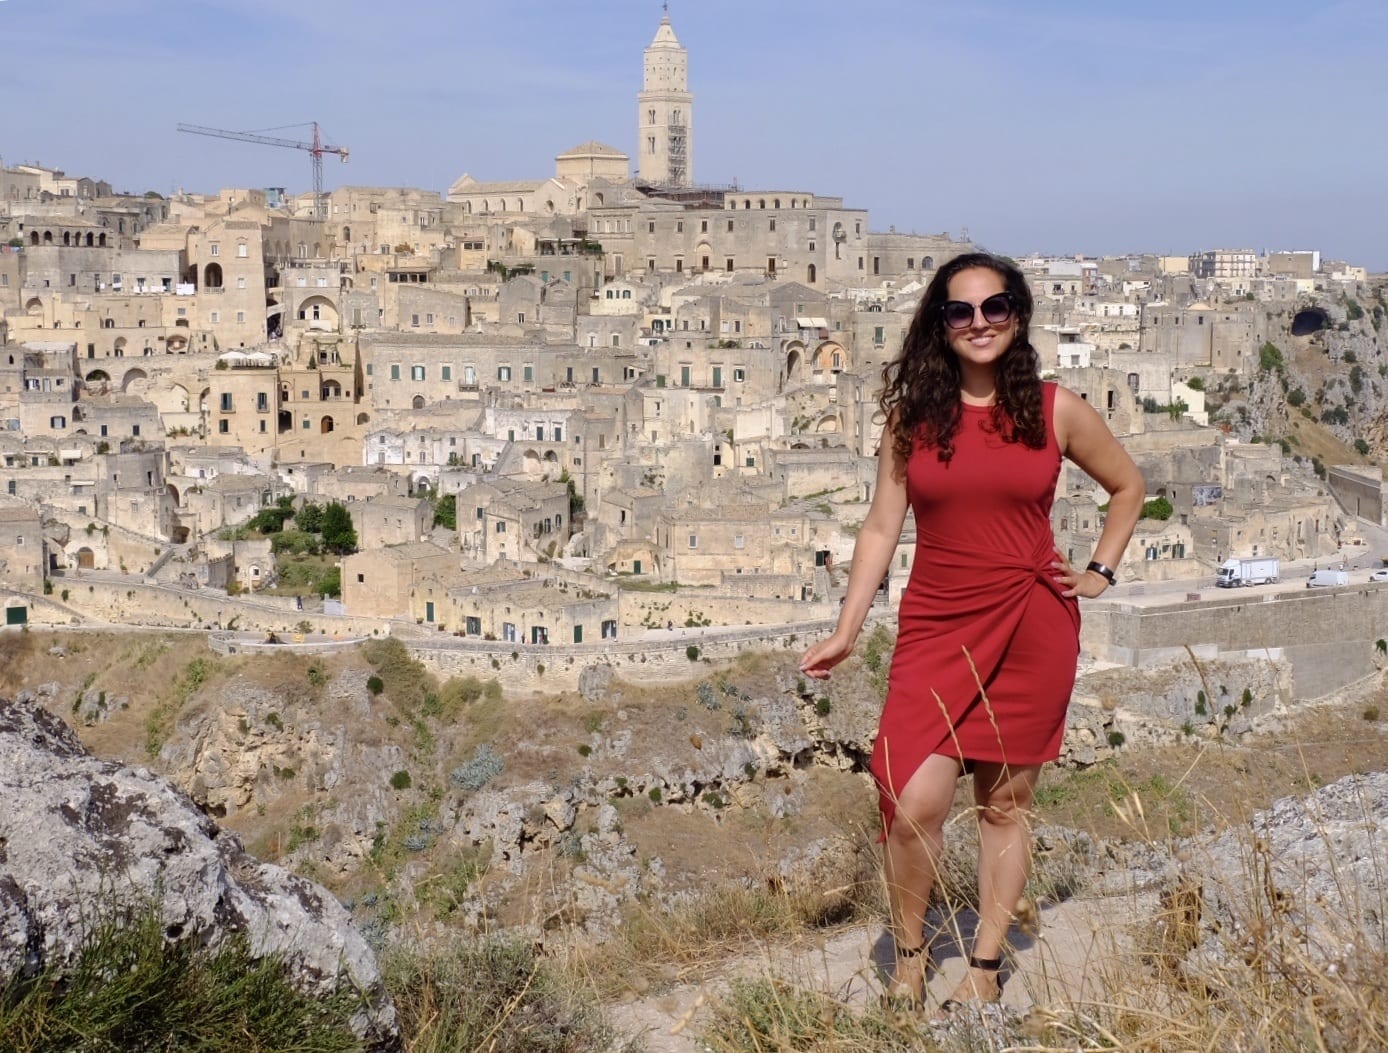 Kate wears a red dress with an asymmetrical hemline and poses in front of the city of Matera: stone towers and homes built on top of a row of sassi (caves).